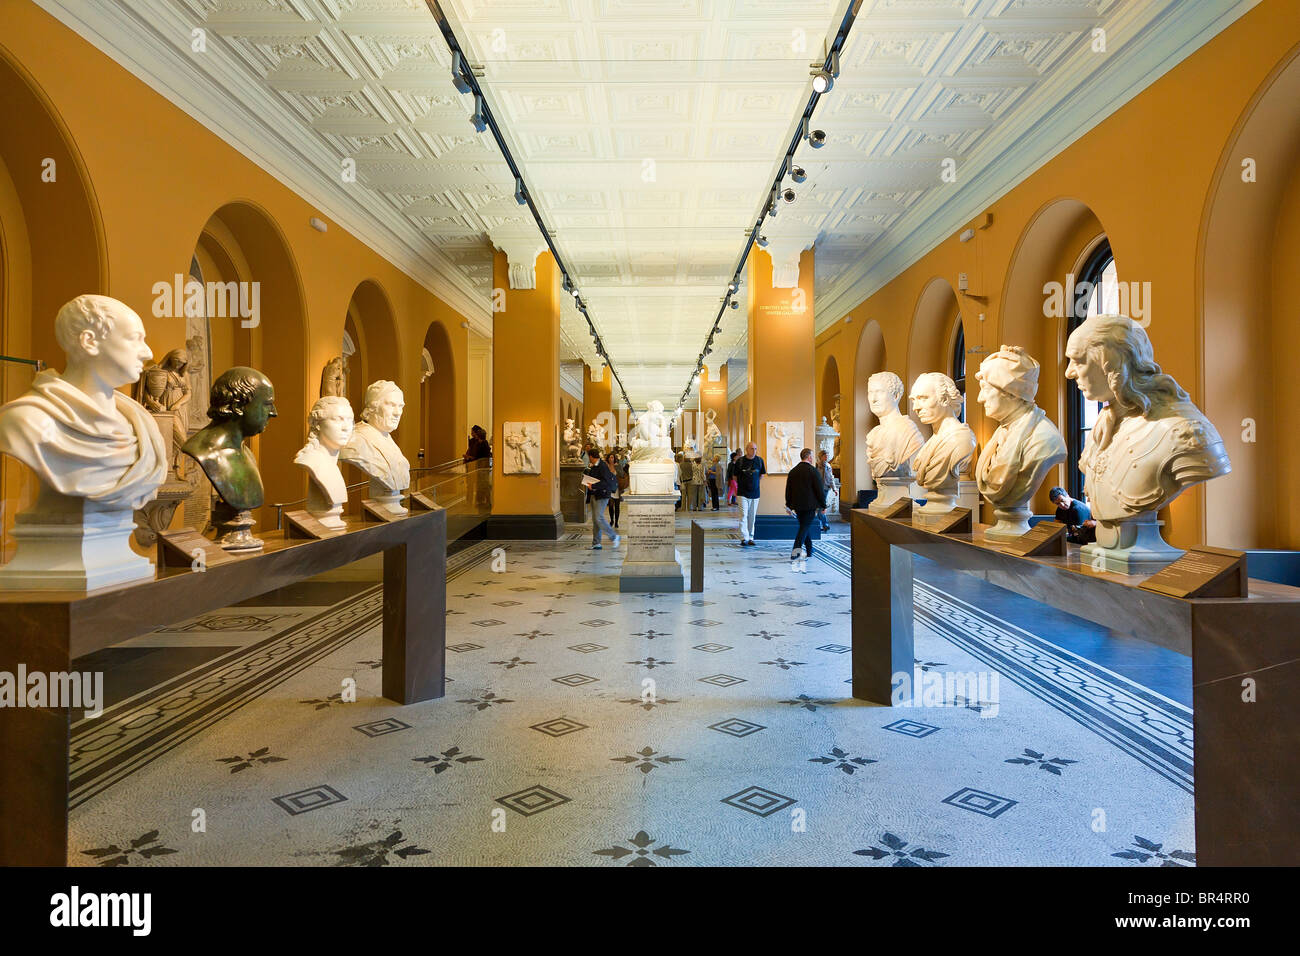 Europe, United Kingdom, England, London, Sculpture in Britain galleries of the Victoria and Albert Museum Stock Photo